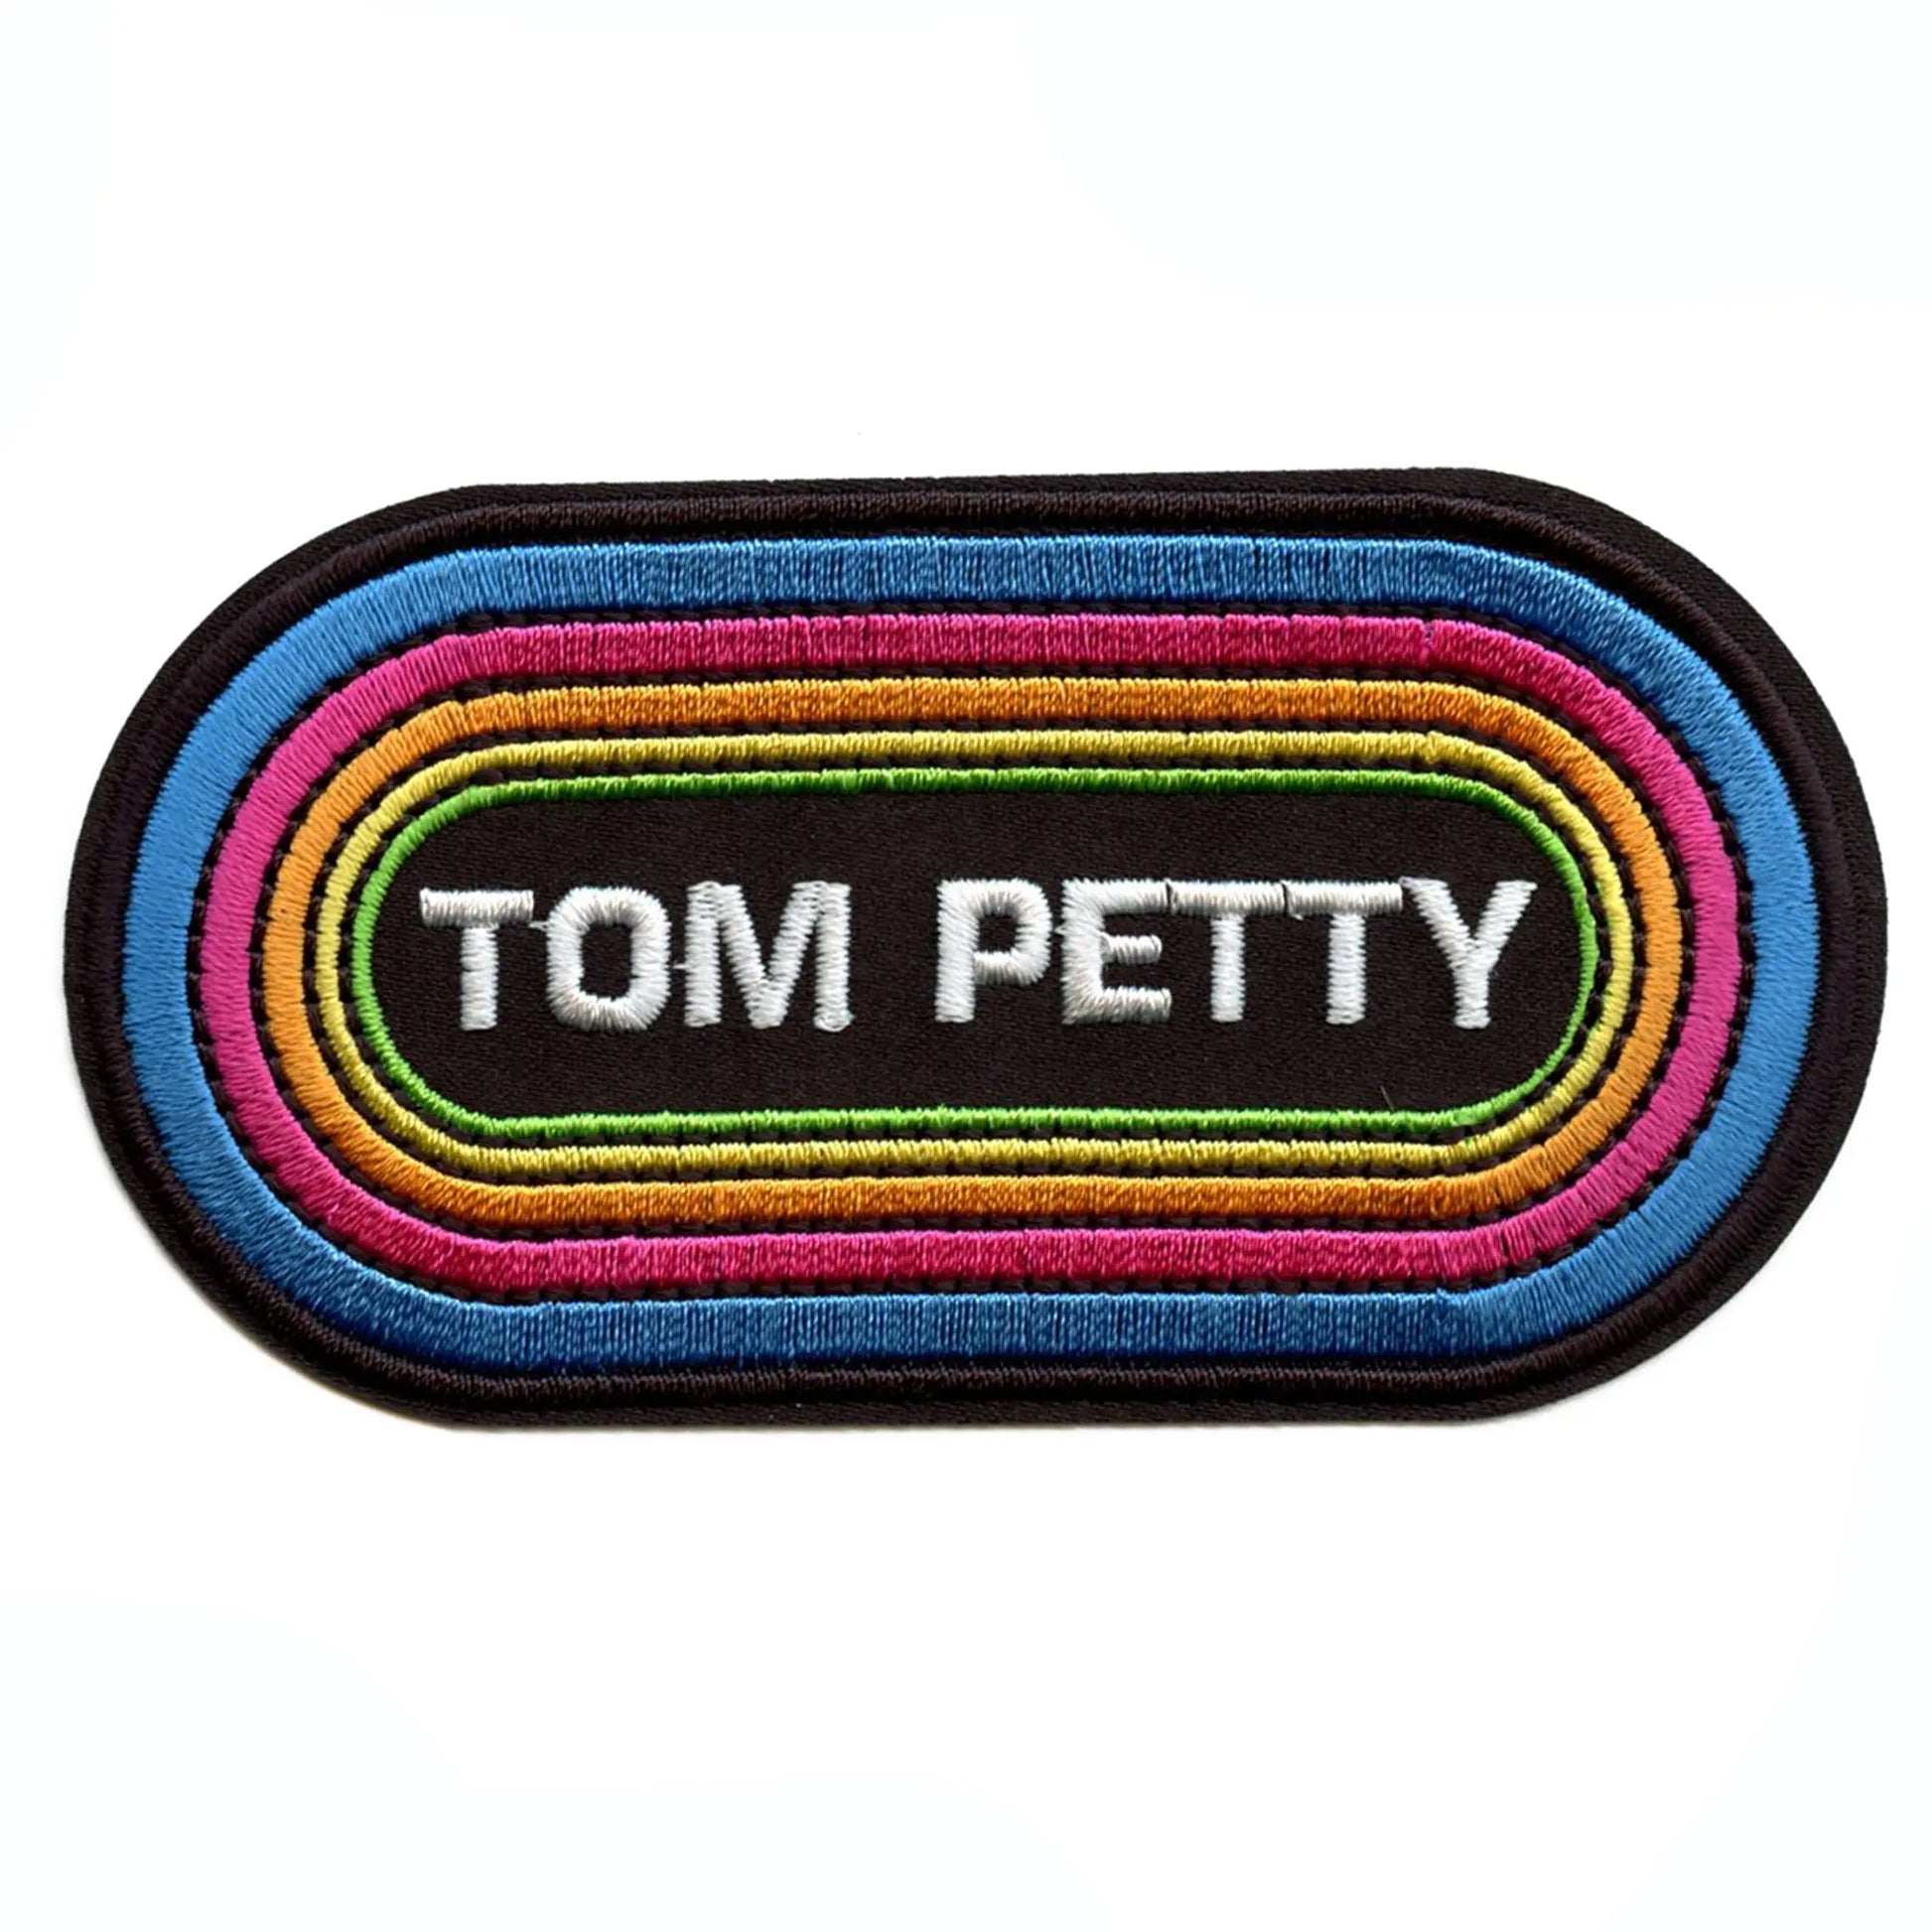 Tom Petty and The Heartbreakers Patch KMET Logo Embroidered Iron On